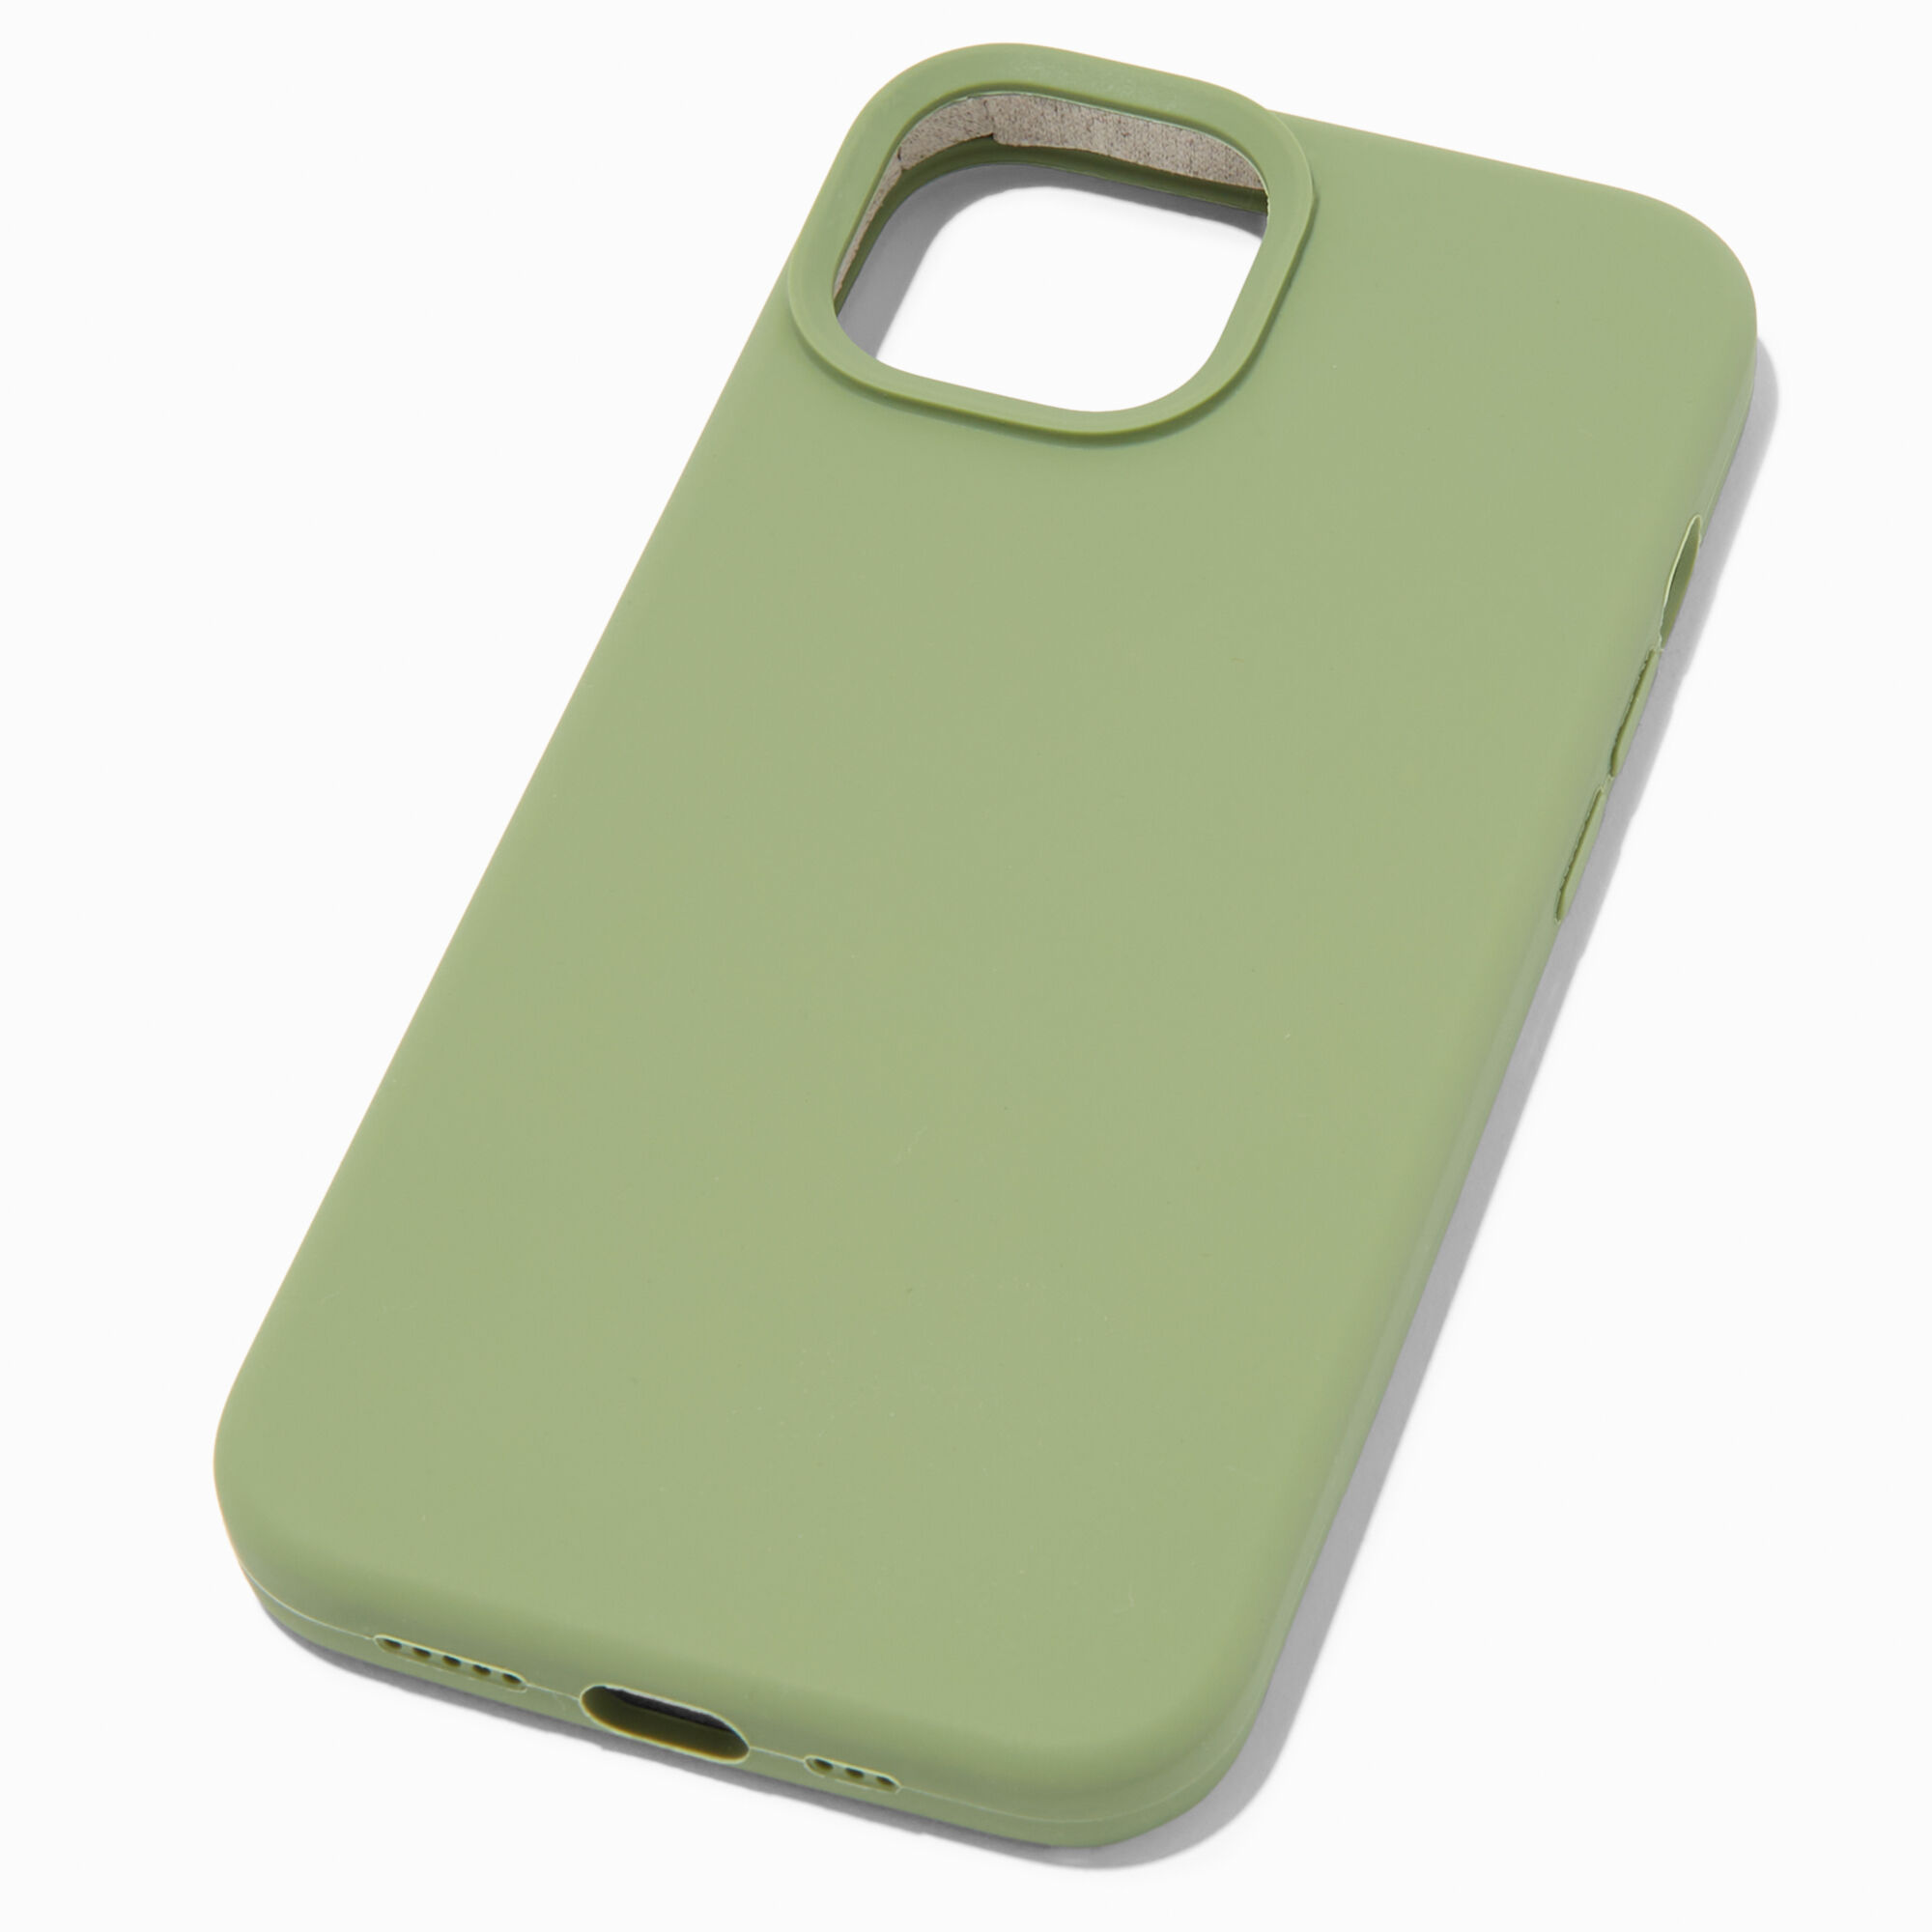 View Claires Solid Sage Silicone Phone Case Fits Iphone 1314 Pro Green information